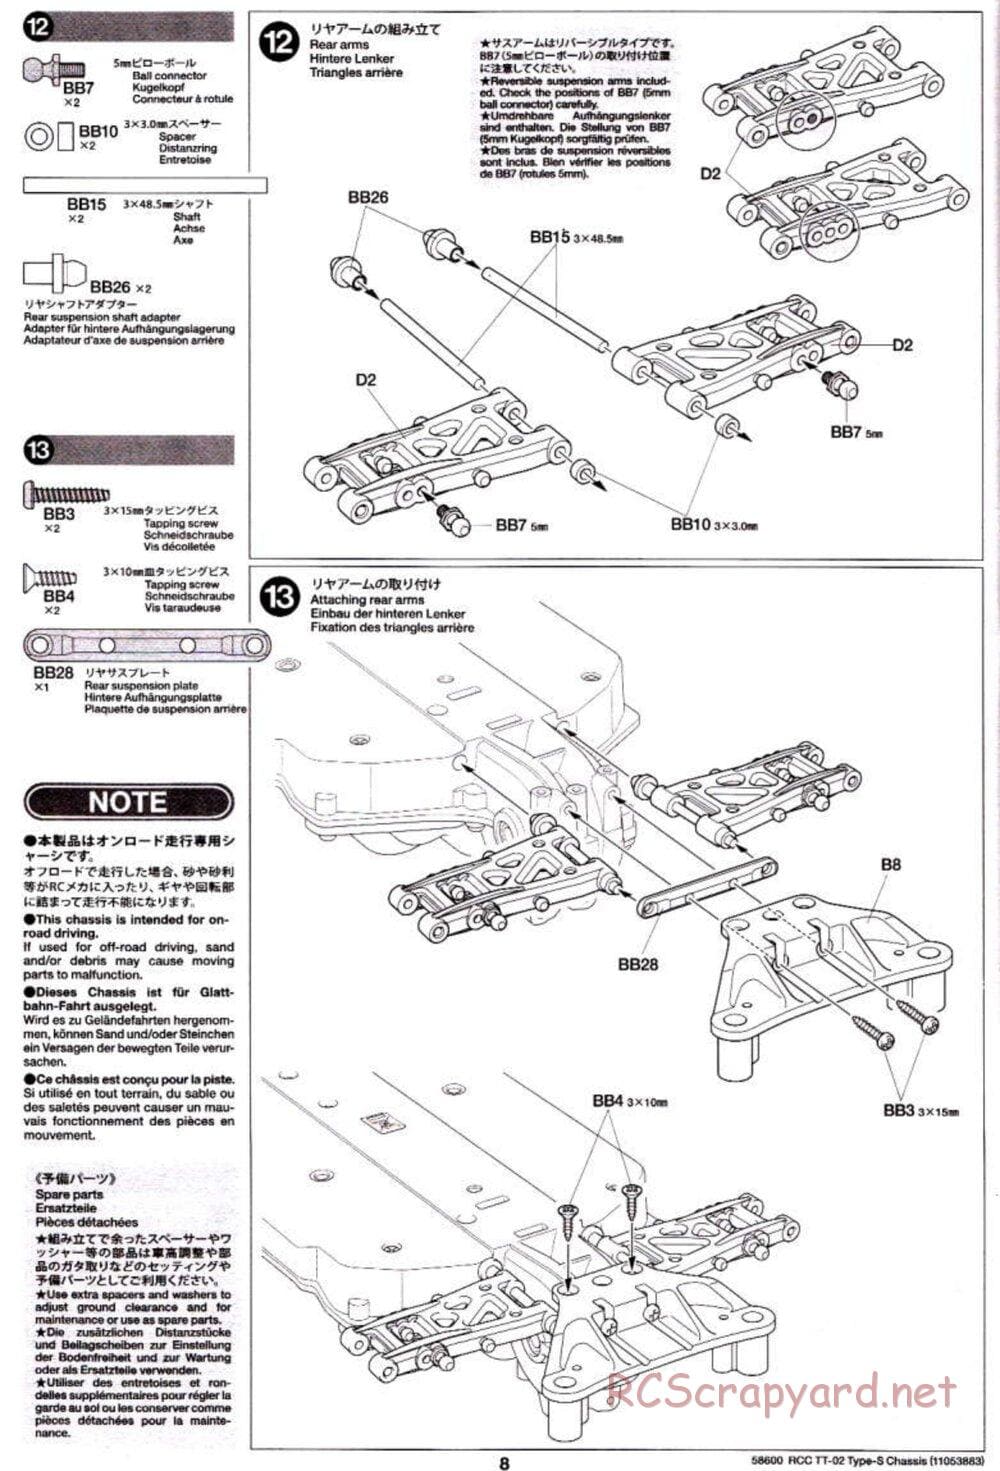 Tamiya - TT-02 Type-S Chassis - Manual - Page 8